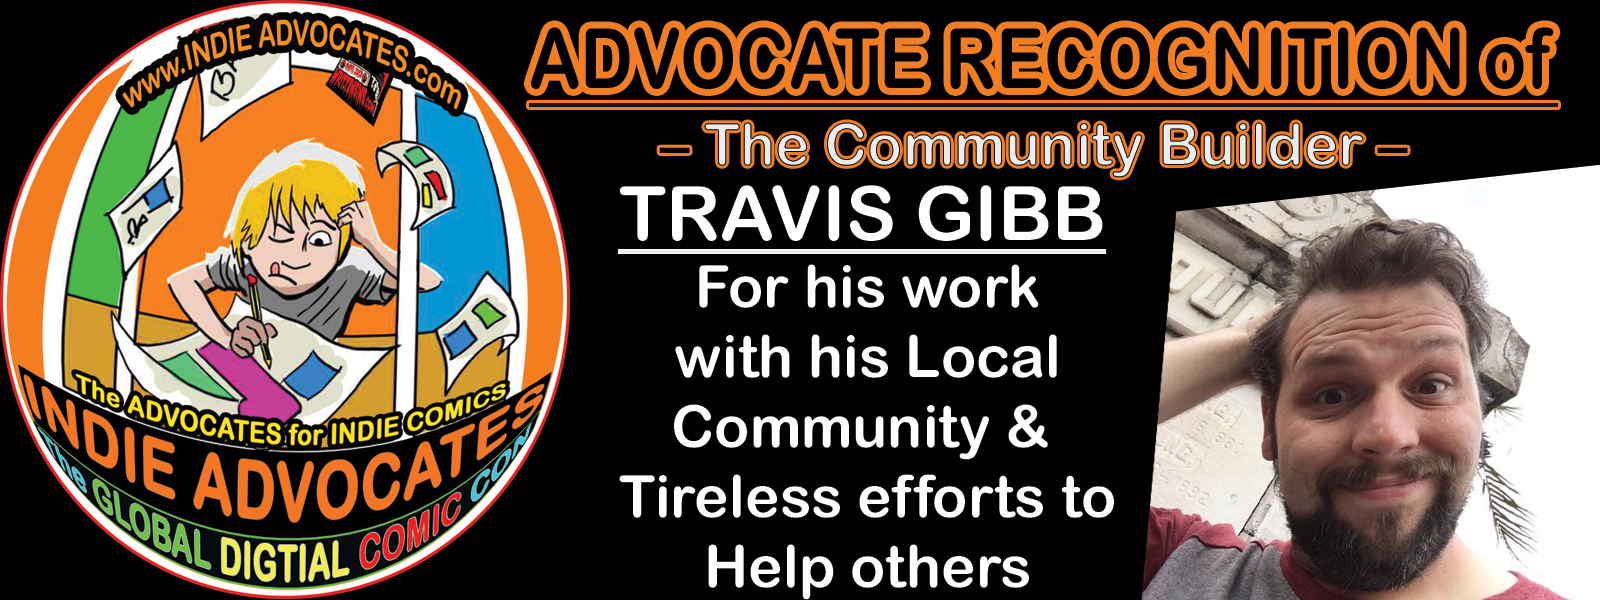 ADVOCATE RECOGNITION  is Give to Travis Gibb for being a Community Buldier